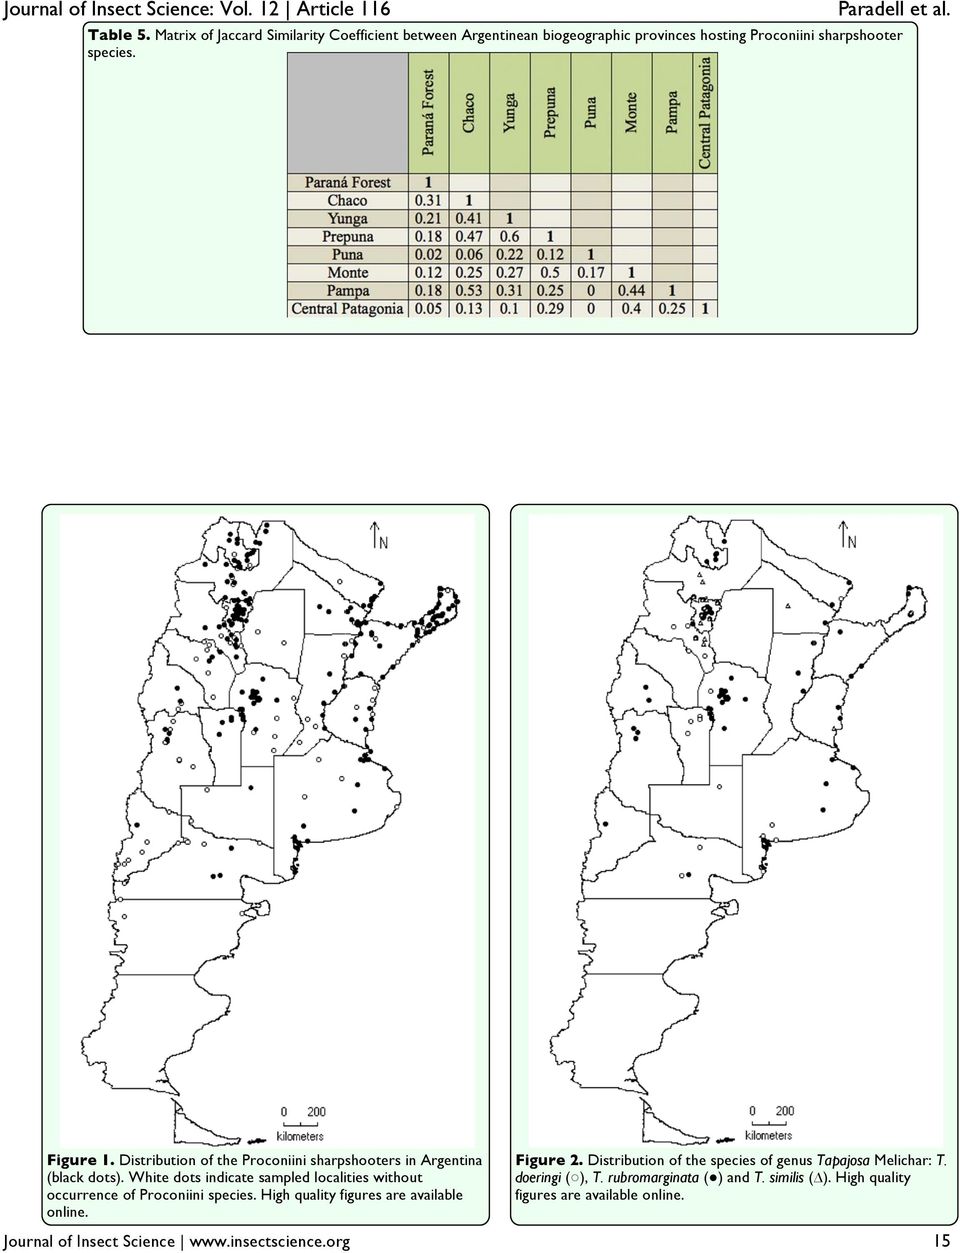 White dots indicate sampled localities without occurrence of Proconiini species. High quality figures are available online. Figure 2.